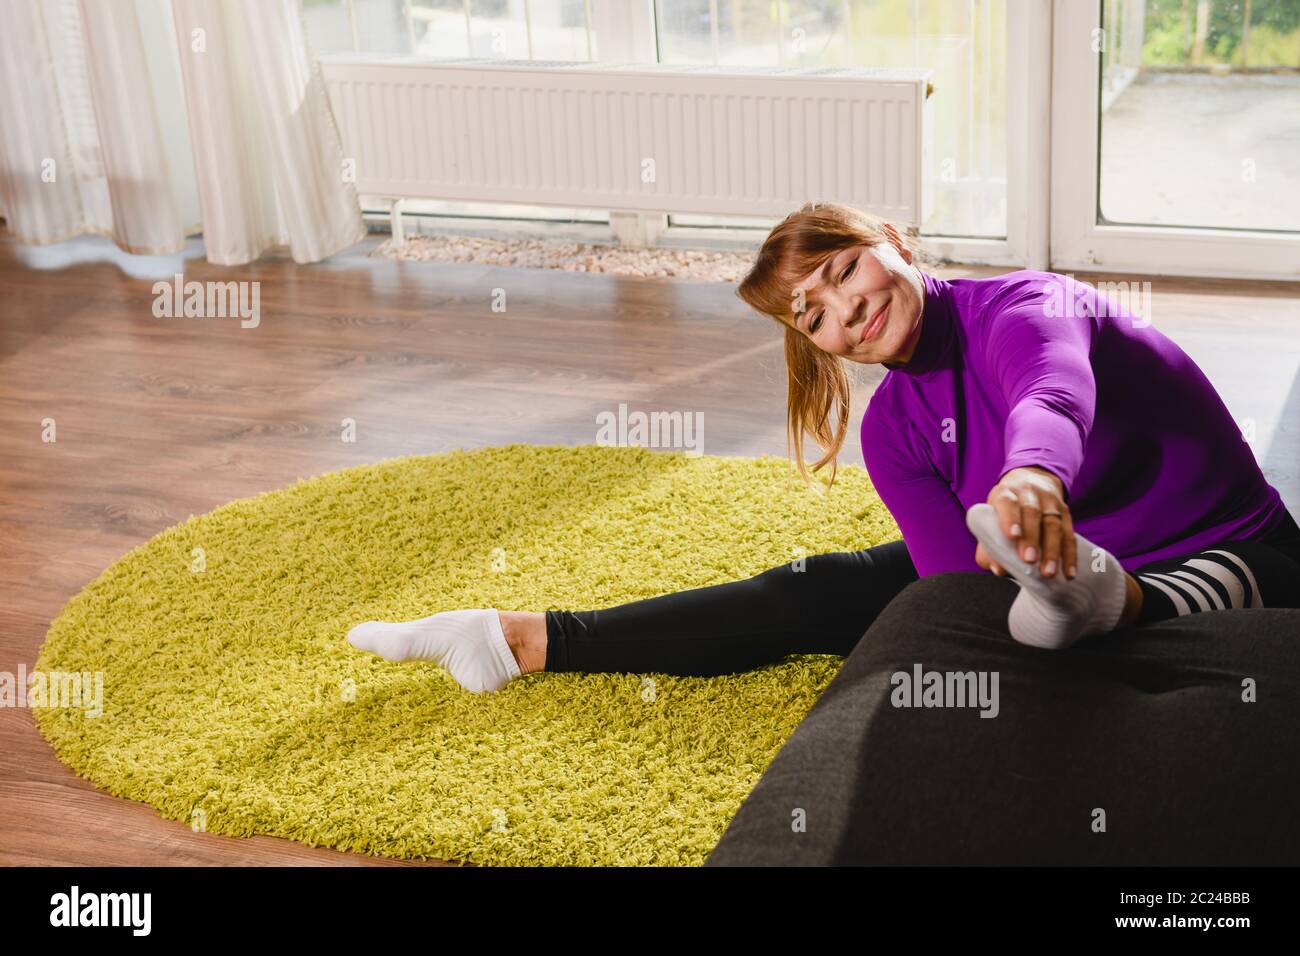 Aged woman pensioner make workout stretching exercise at home sofa and carpet, wearing sport leggings and purple top, active retirement lifestyle Stock Photo